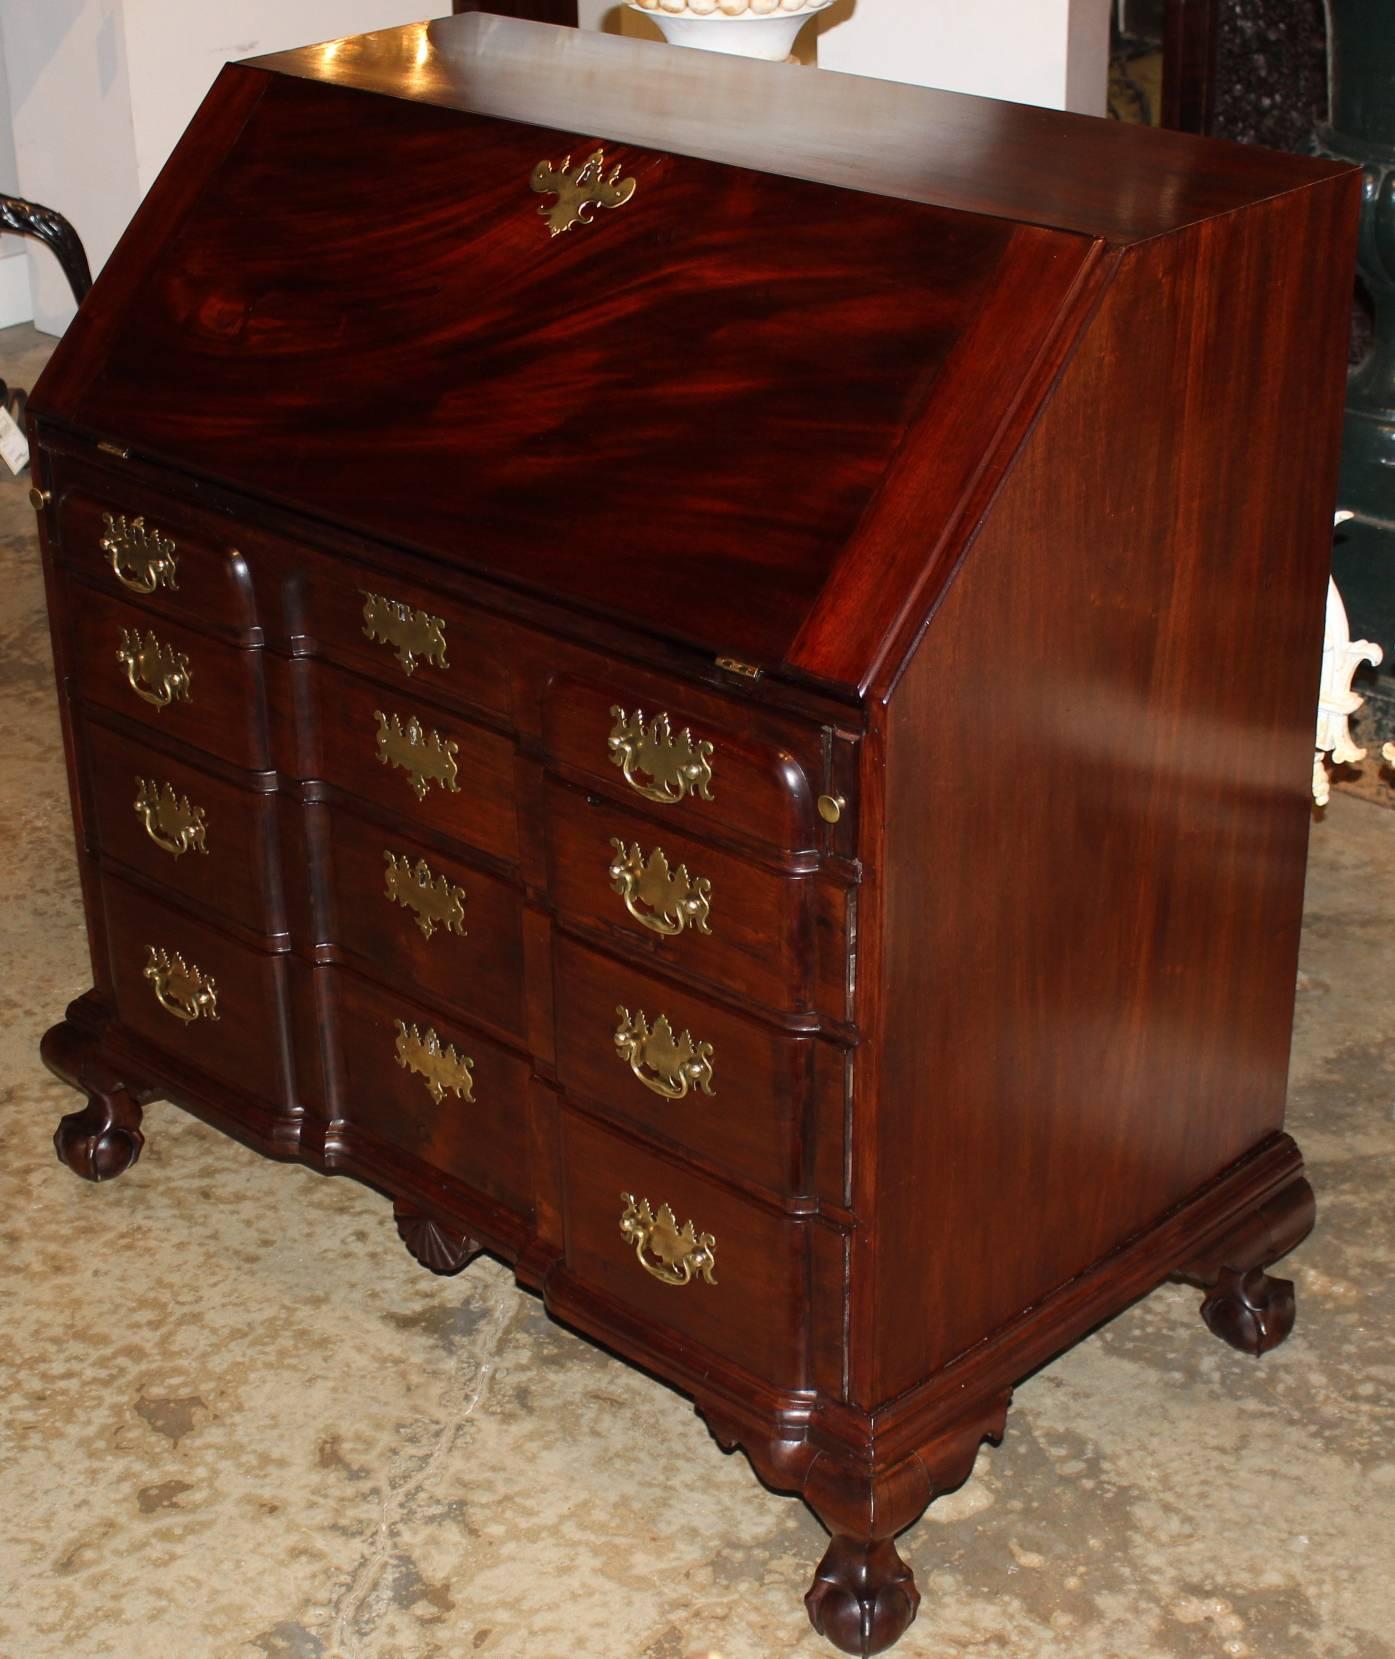 An exceptional block front slant front desk, Boston, circa 1770, in Honduran mahogany with spectacular compartmentalized interior, including hidden document drawers flanking the prospect door. The four blocked and graduated drawers are supported by